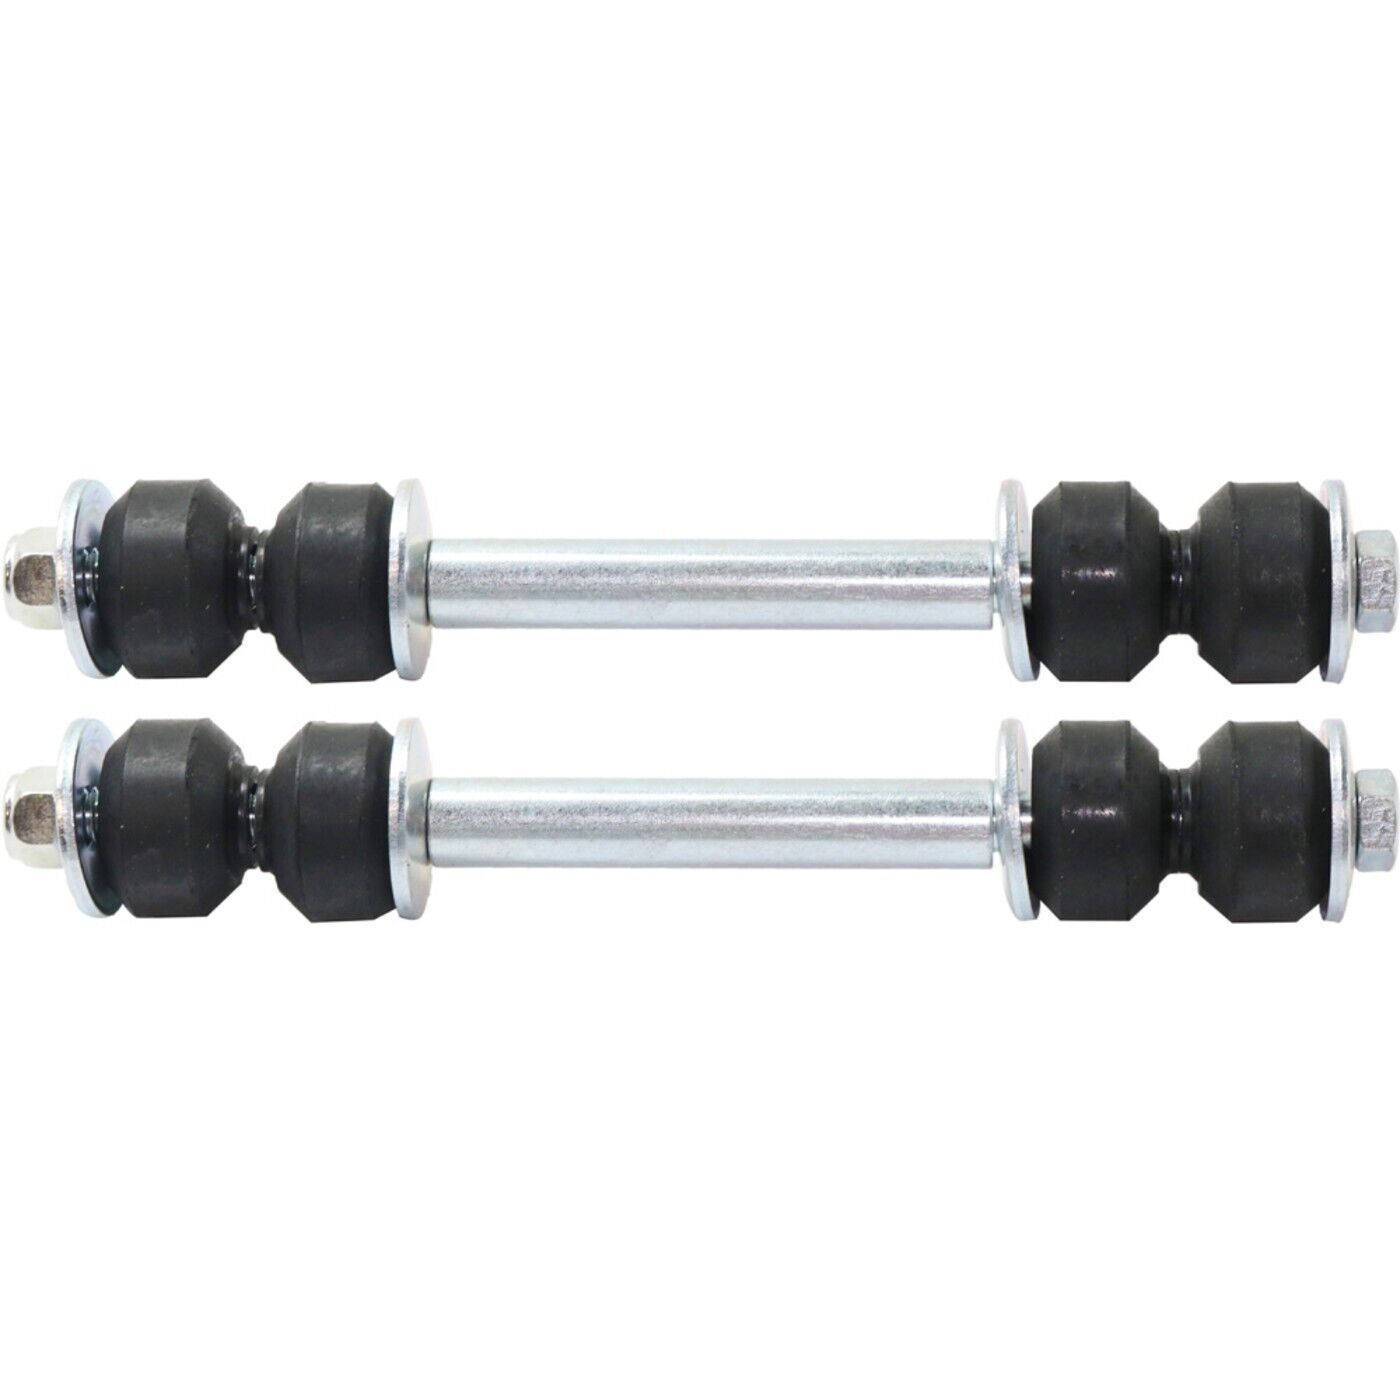 Set of 2 Sway Bar Links Front for Chevy Olds S10 Pickup S-10 BLAZER Jimmy Pair